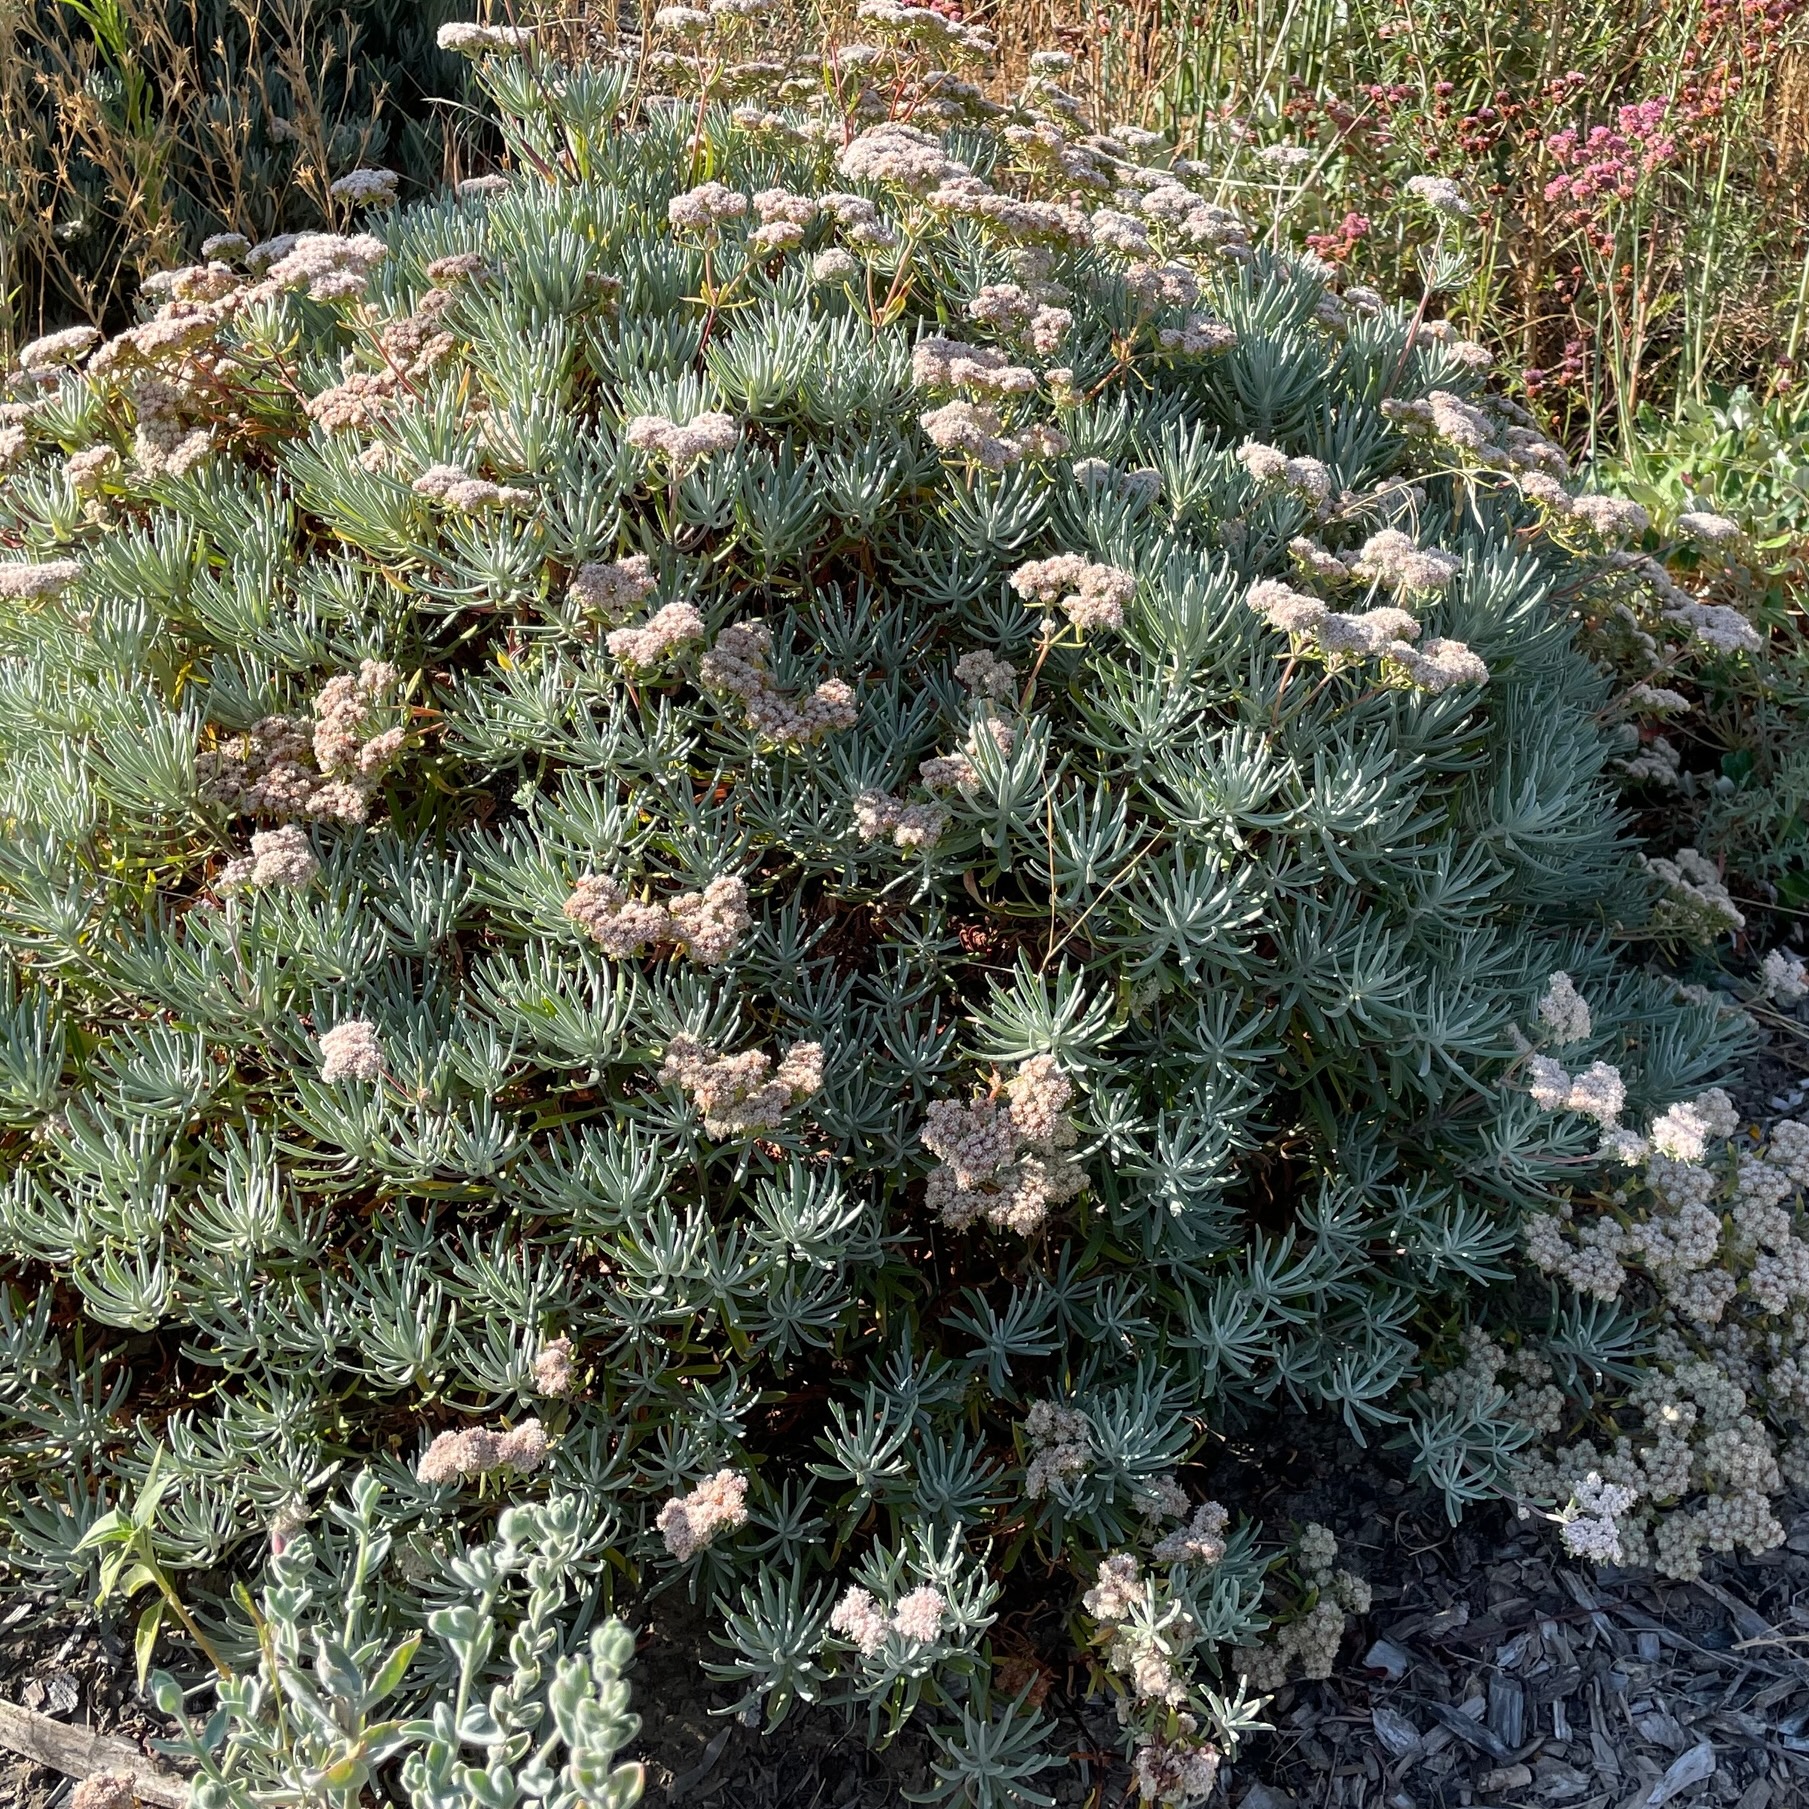 A shrub made up of light gray green leaves, dotted with bunches of flowers